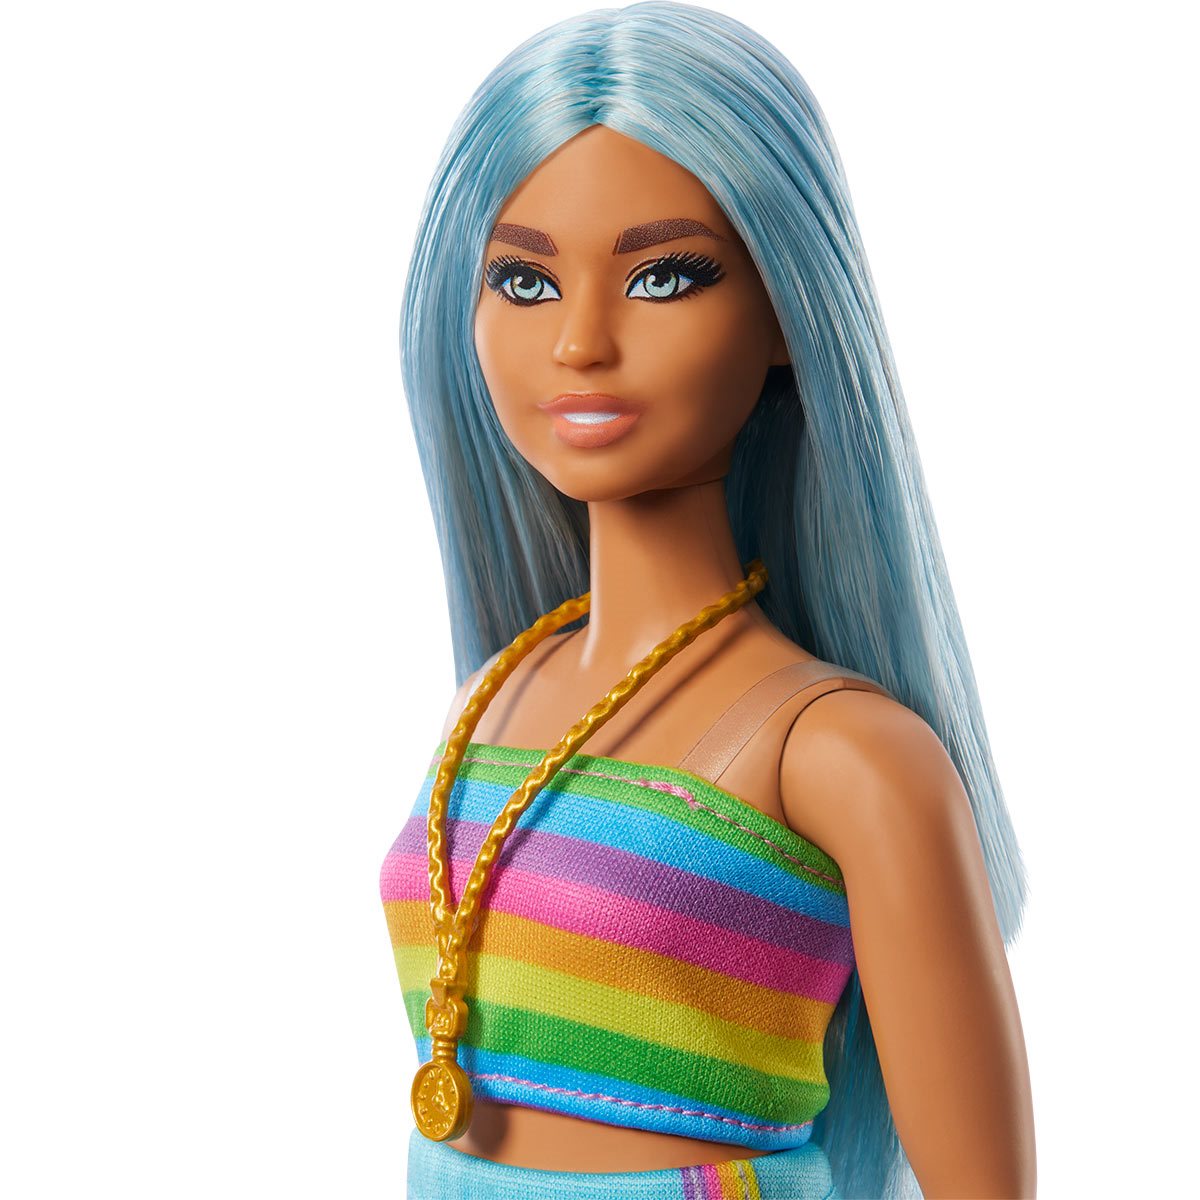 Barbie Fashionistas Doll With Rainbow Top And Teal Skirt